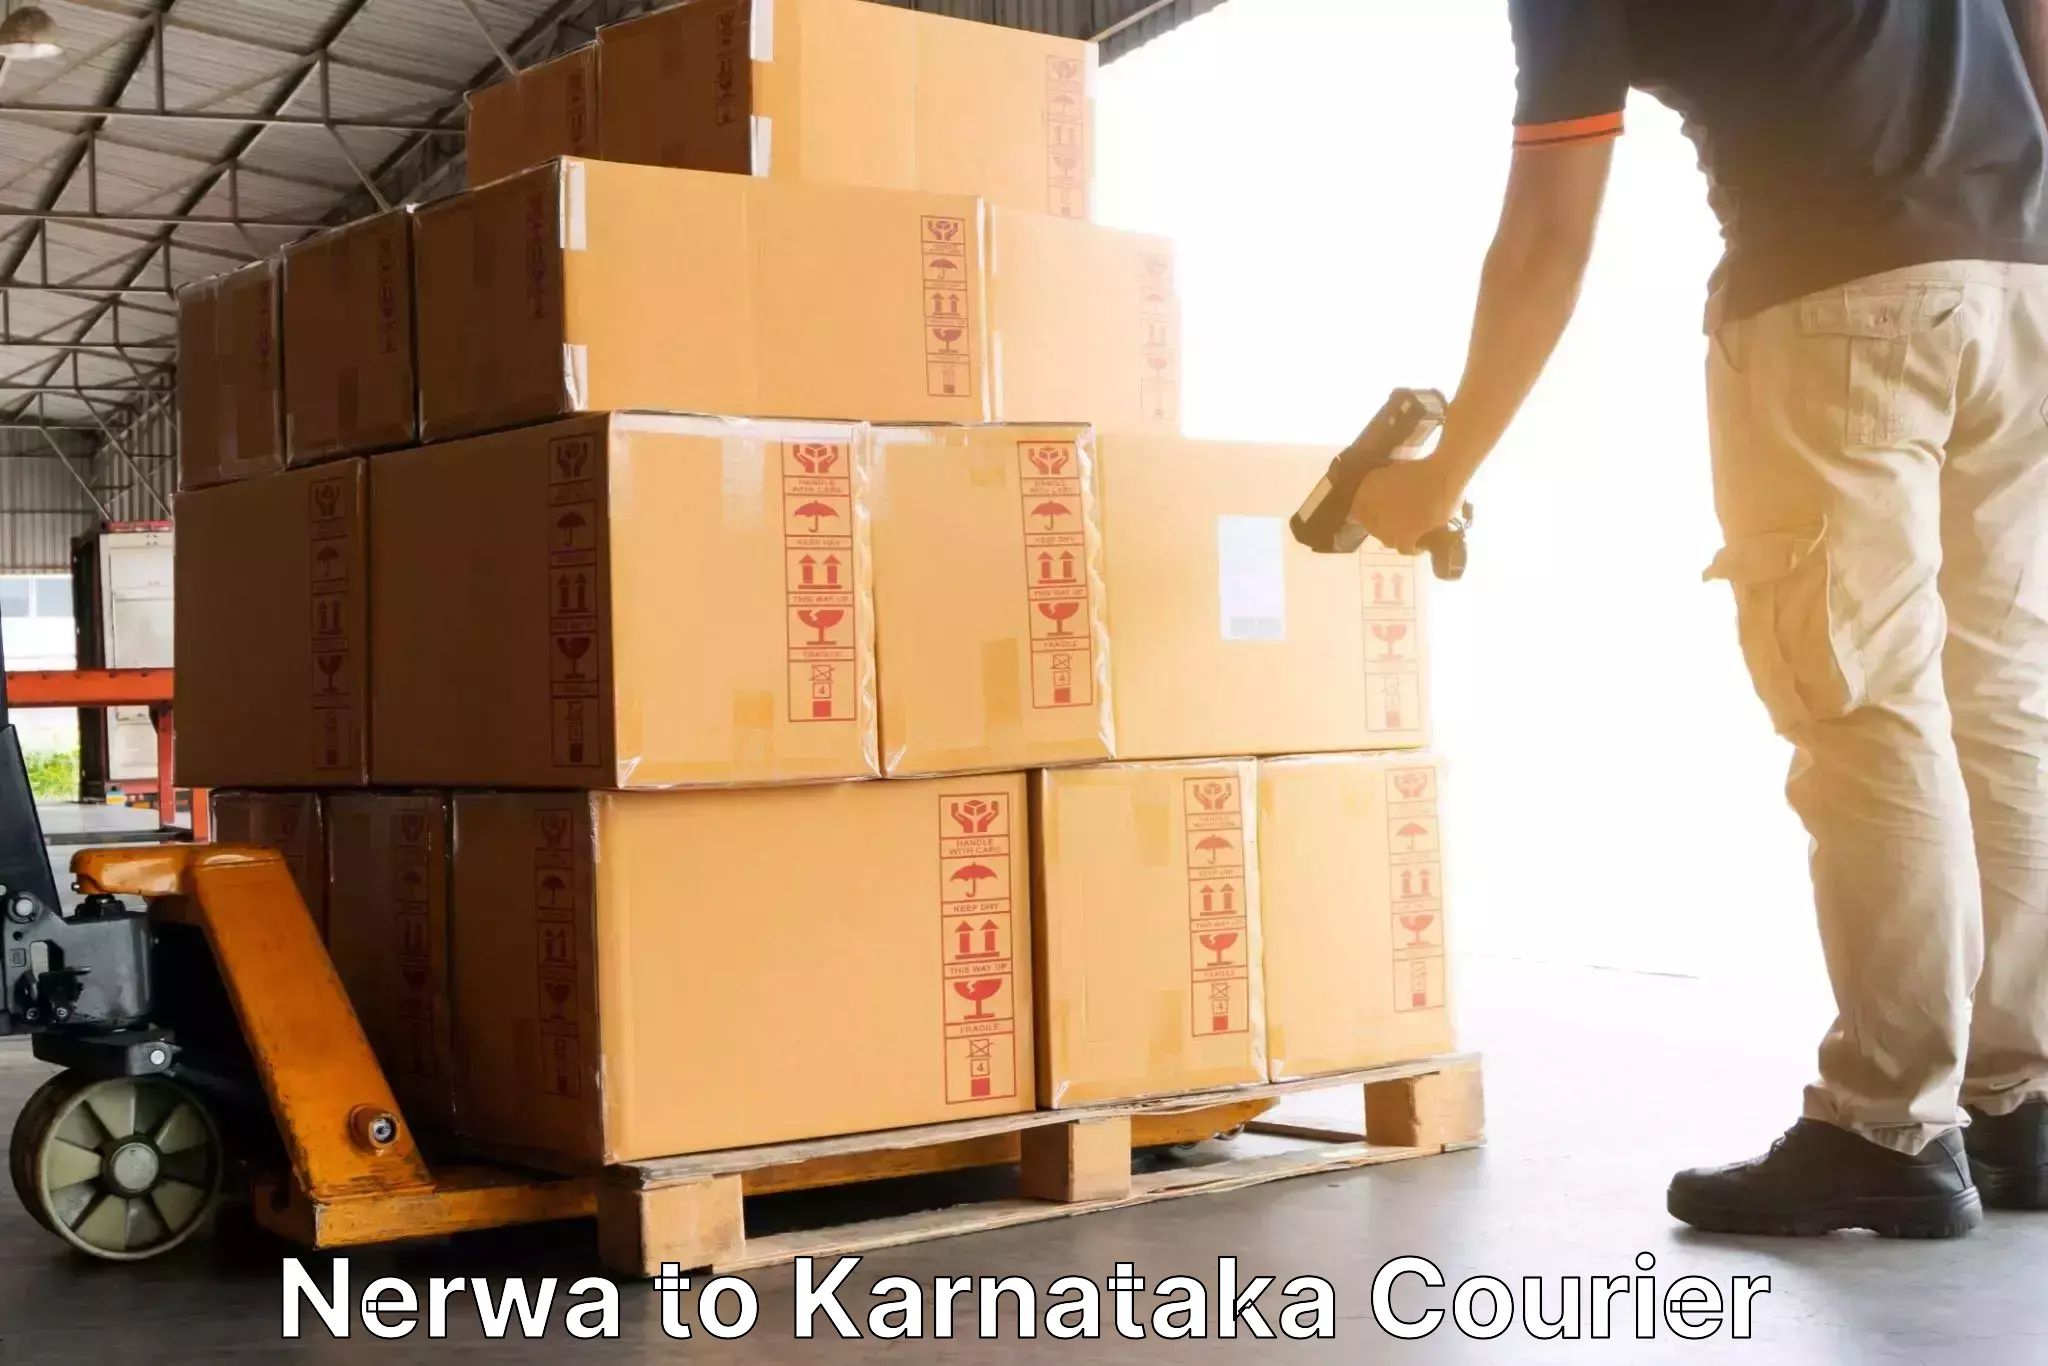 Modern delivery methods in Nerwa to Shorapur